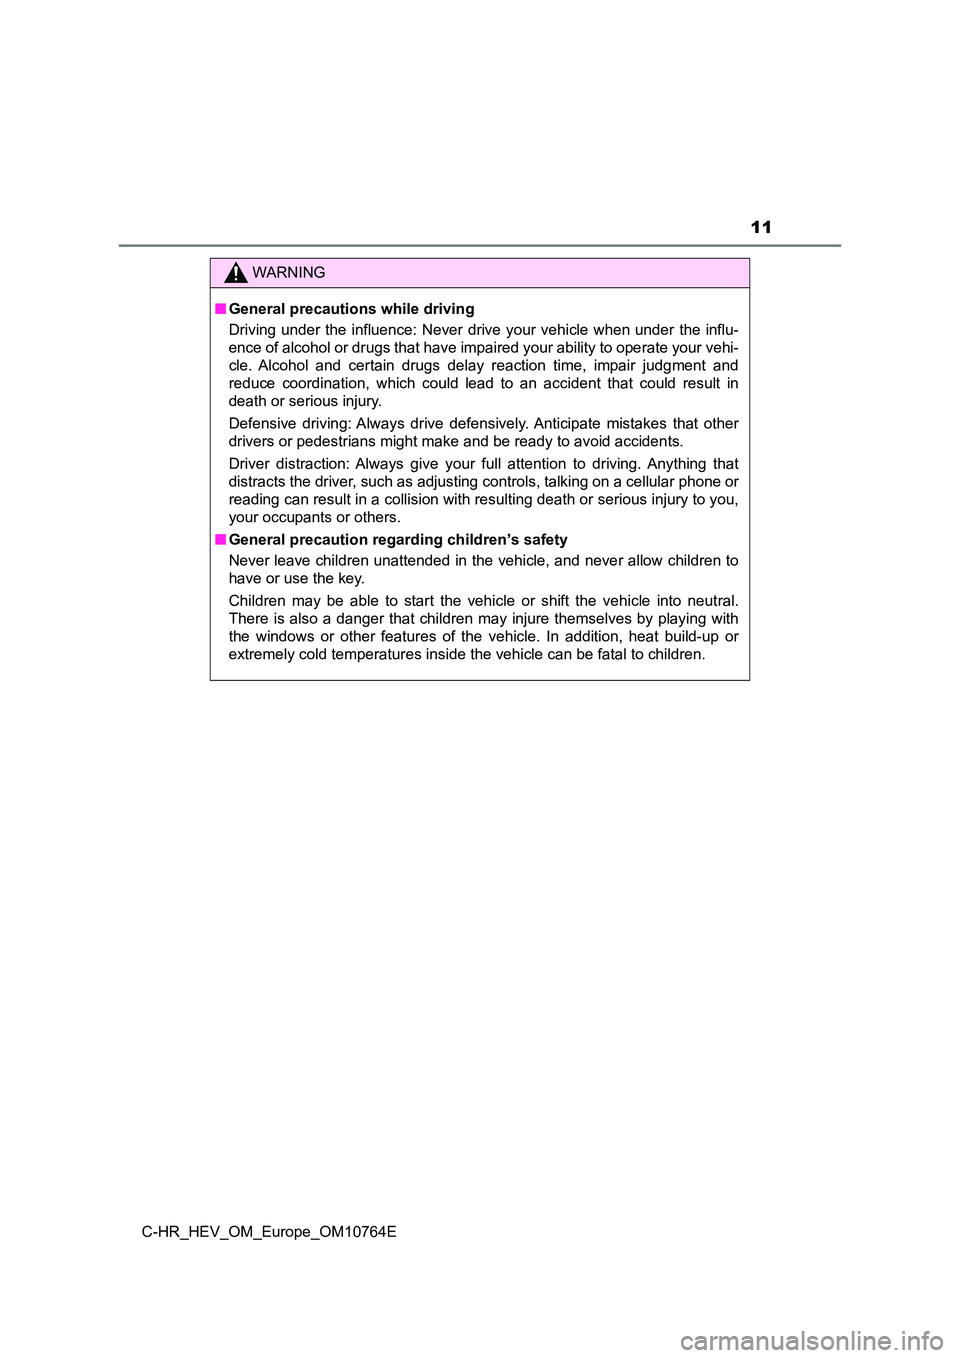 TOYOTA C-HR 2023  Owners Manual 11
C-HR_HEV_OM_Europe_OM10764E
WARNING
■General precautions while driving 
Driving  under  the influence:  Never  drive  your vehicle when unde r the  influ- 
ence of alcohol or drugs that have impa